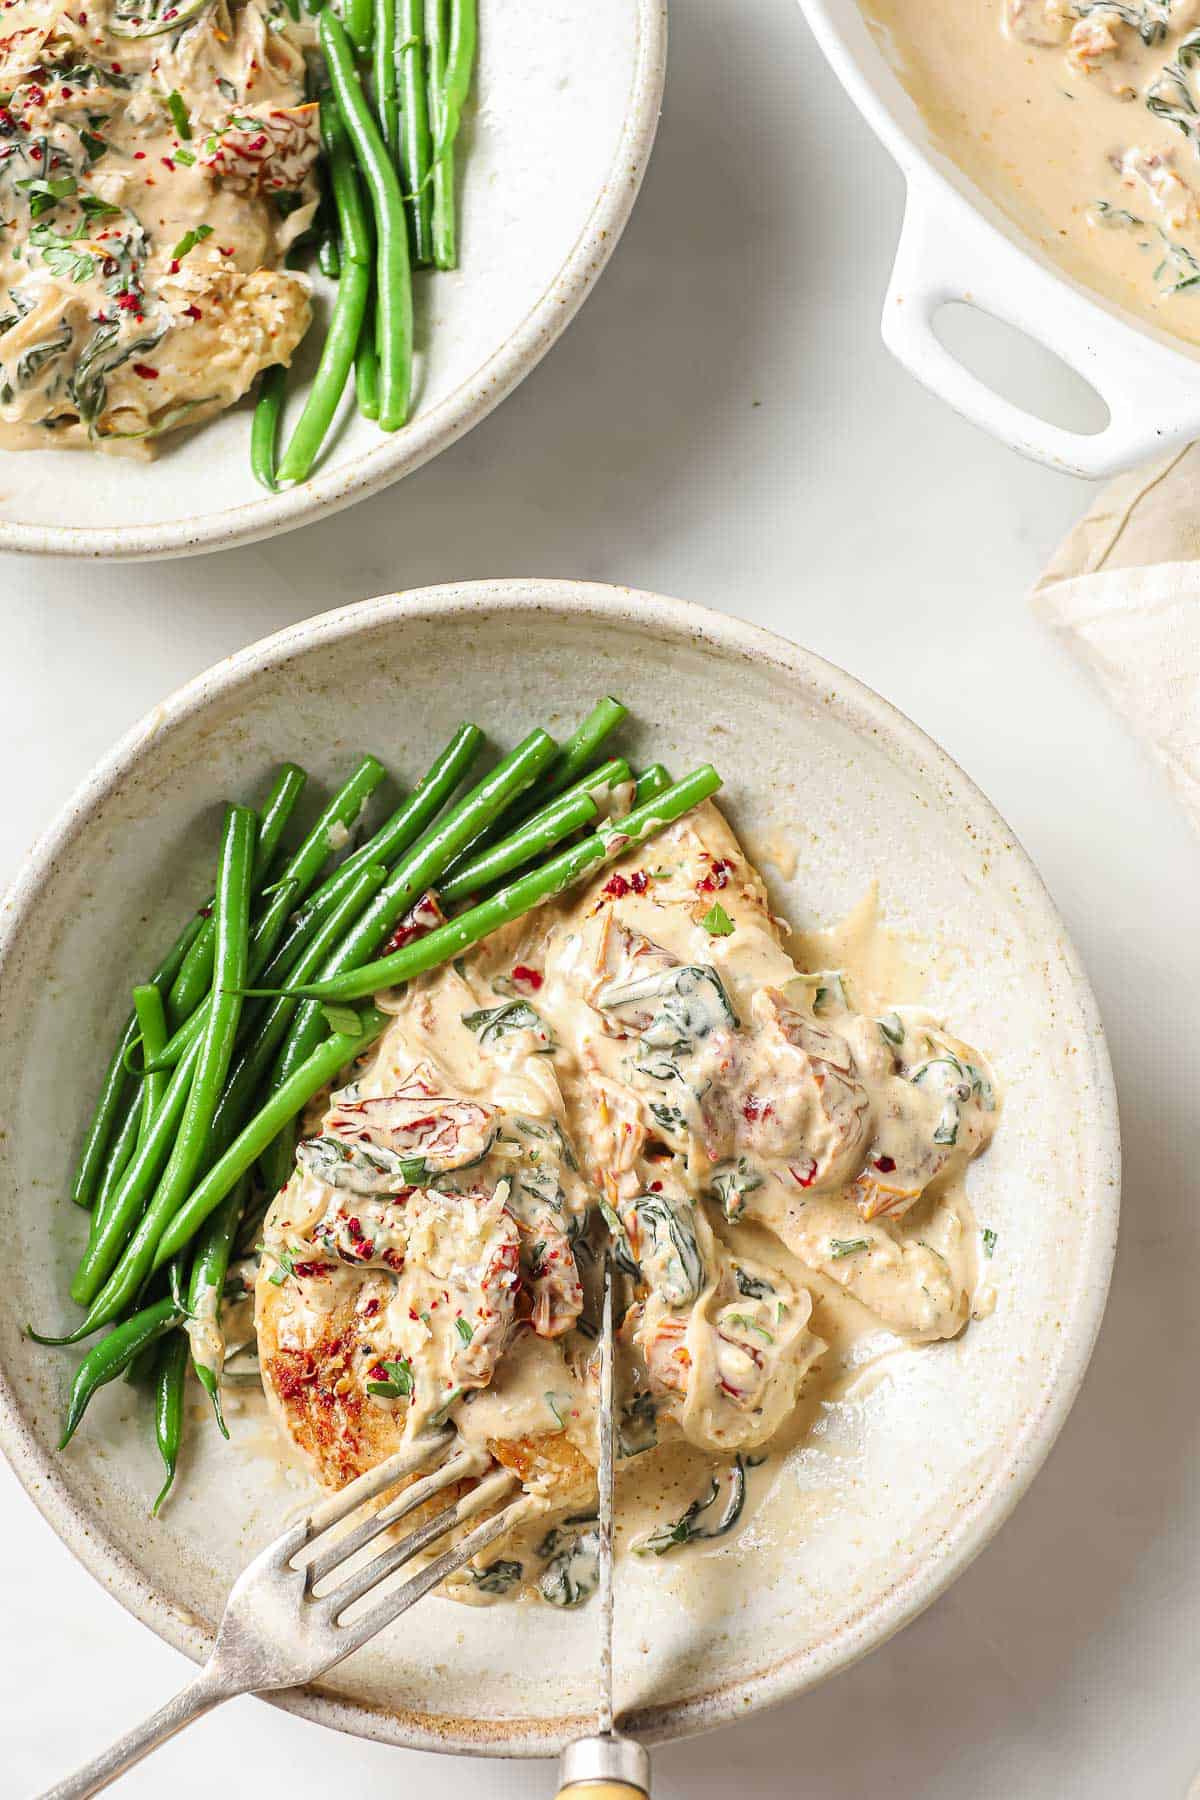 2 white bowls full of a creamy chicken dish with sun-dried tomatoes and spinach, served with a side of green beans.